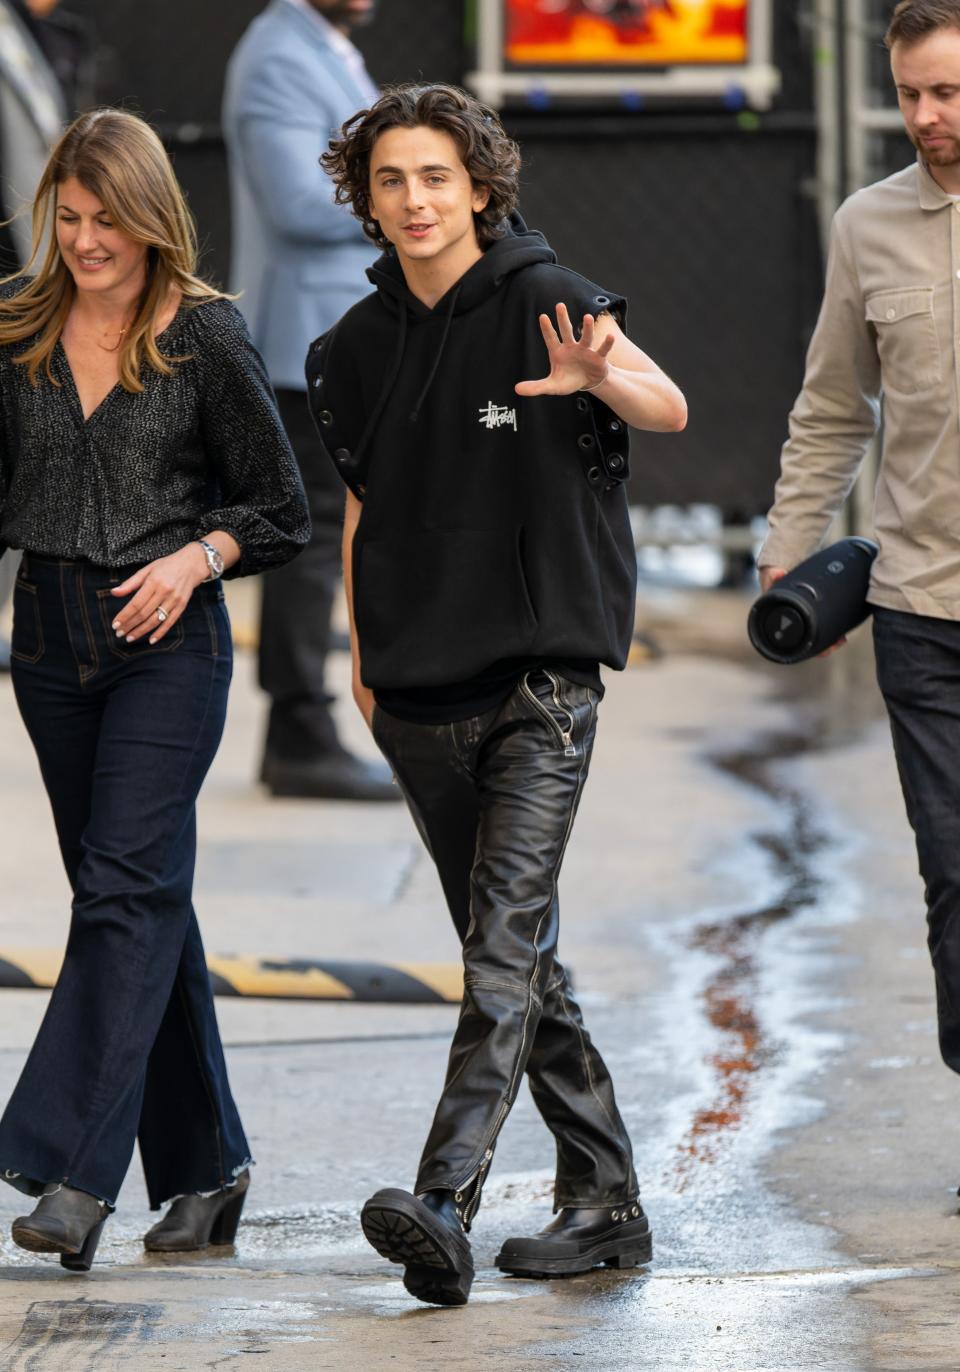 In February, Timothée Chalamet wore leather trousers and a Stüssy x Junya Watanabe hoodie on Jimmy Kimmel Live.